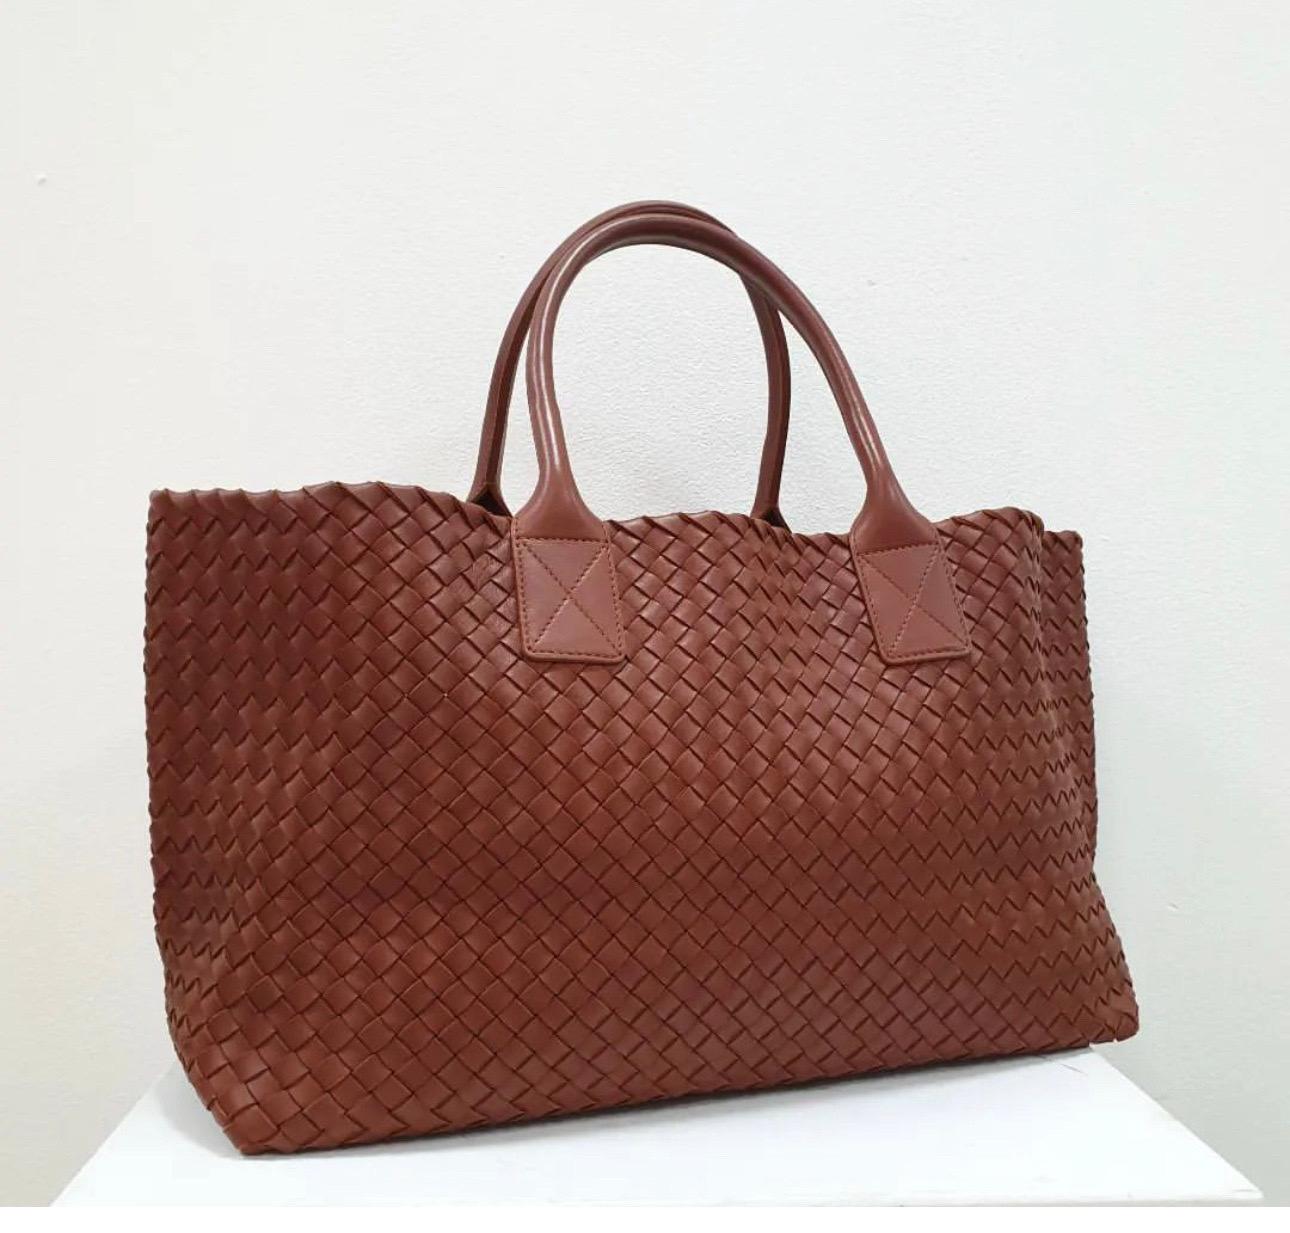 Gorgeous and rare Bottega Veneta  Cabat Tote Bag. 
Made in limited quantities, this bag is entirely hand woven inside and out. 
The chic and slouchy look features Bottega's signature woven leather with more than enough room to fit all of your daily